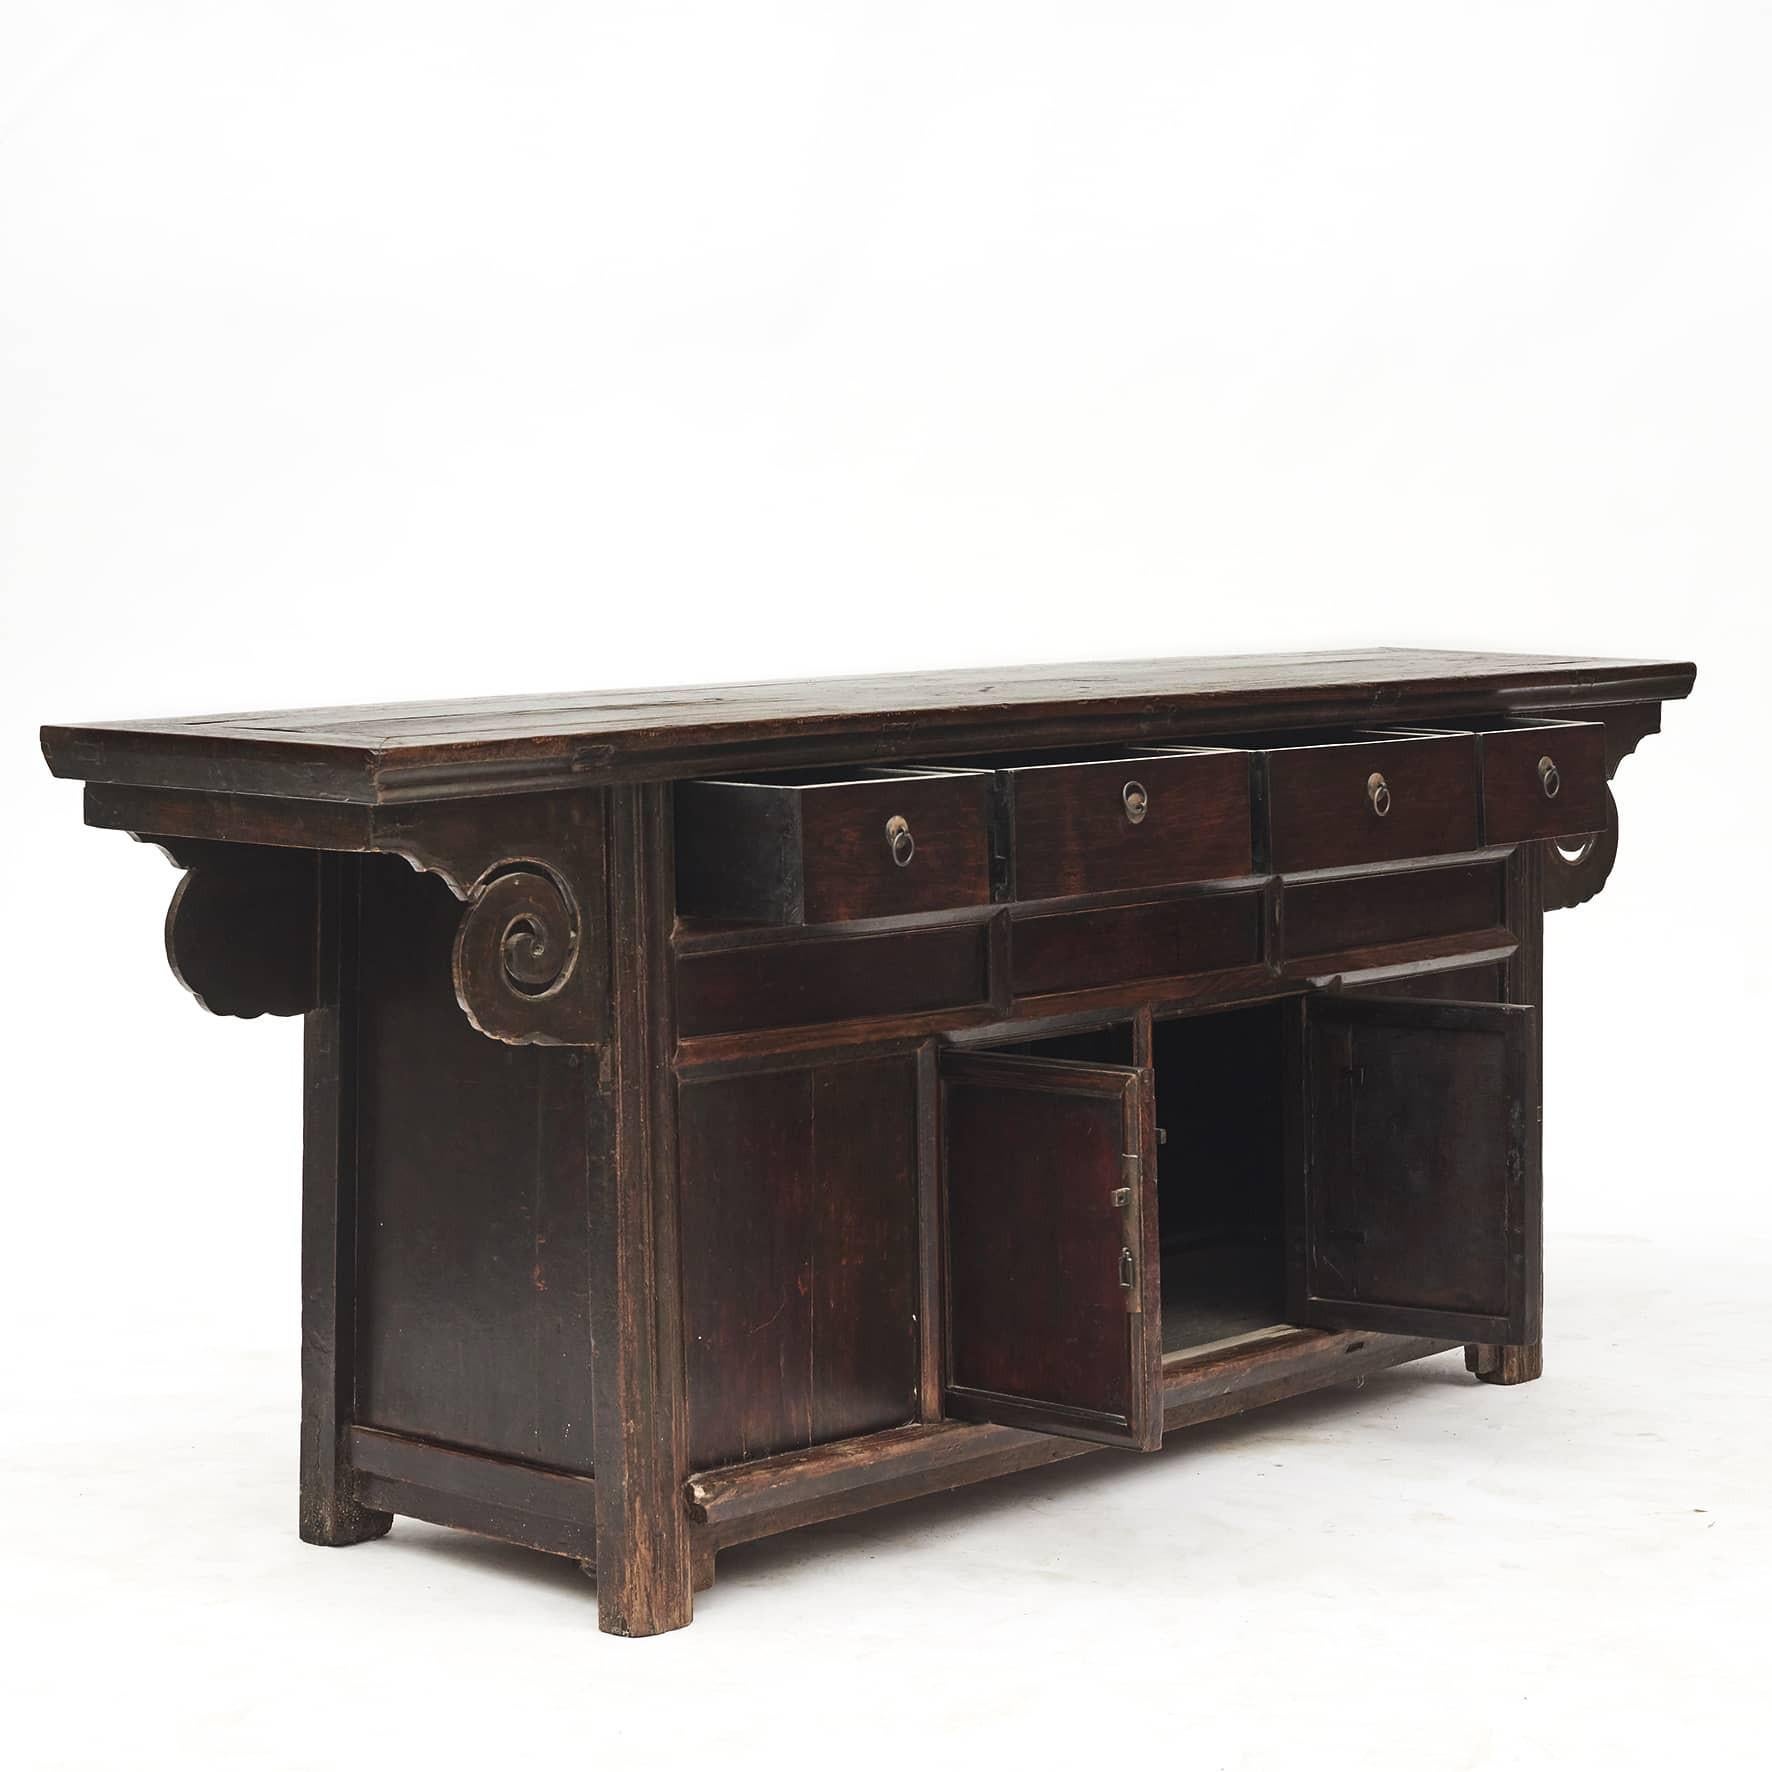 Sideboard, Qing style from the late 18th century.
Elm wood with burgundy lacquer, natural age-related patina and wear.
4 Drawers and a pair of doors.

Original condition, lovingly restored.